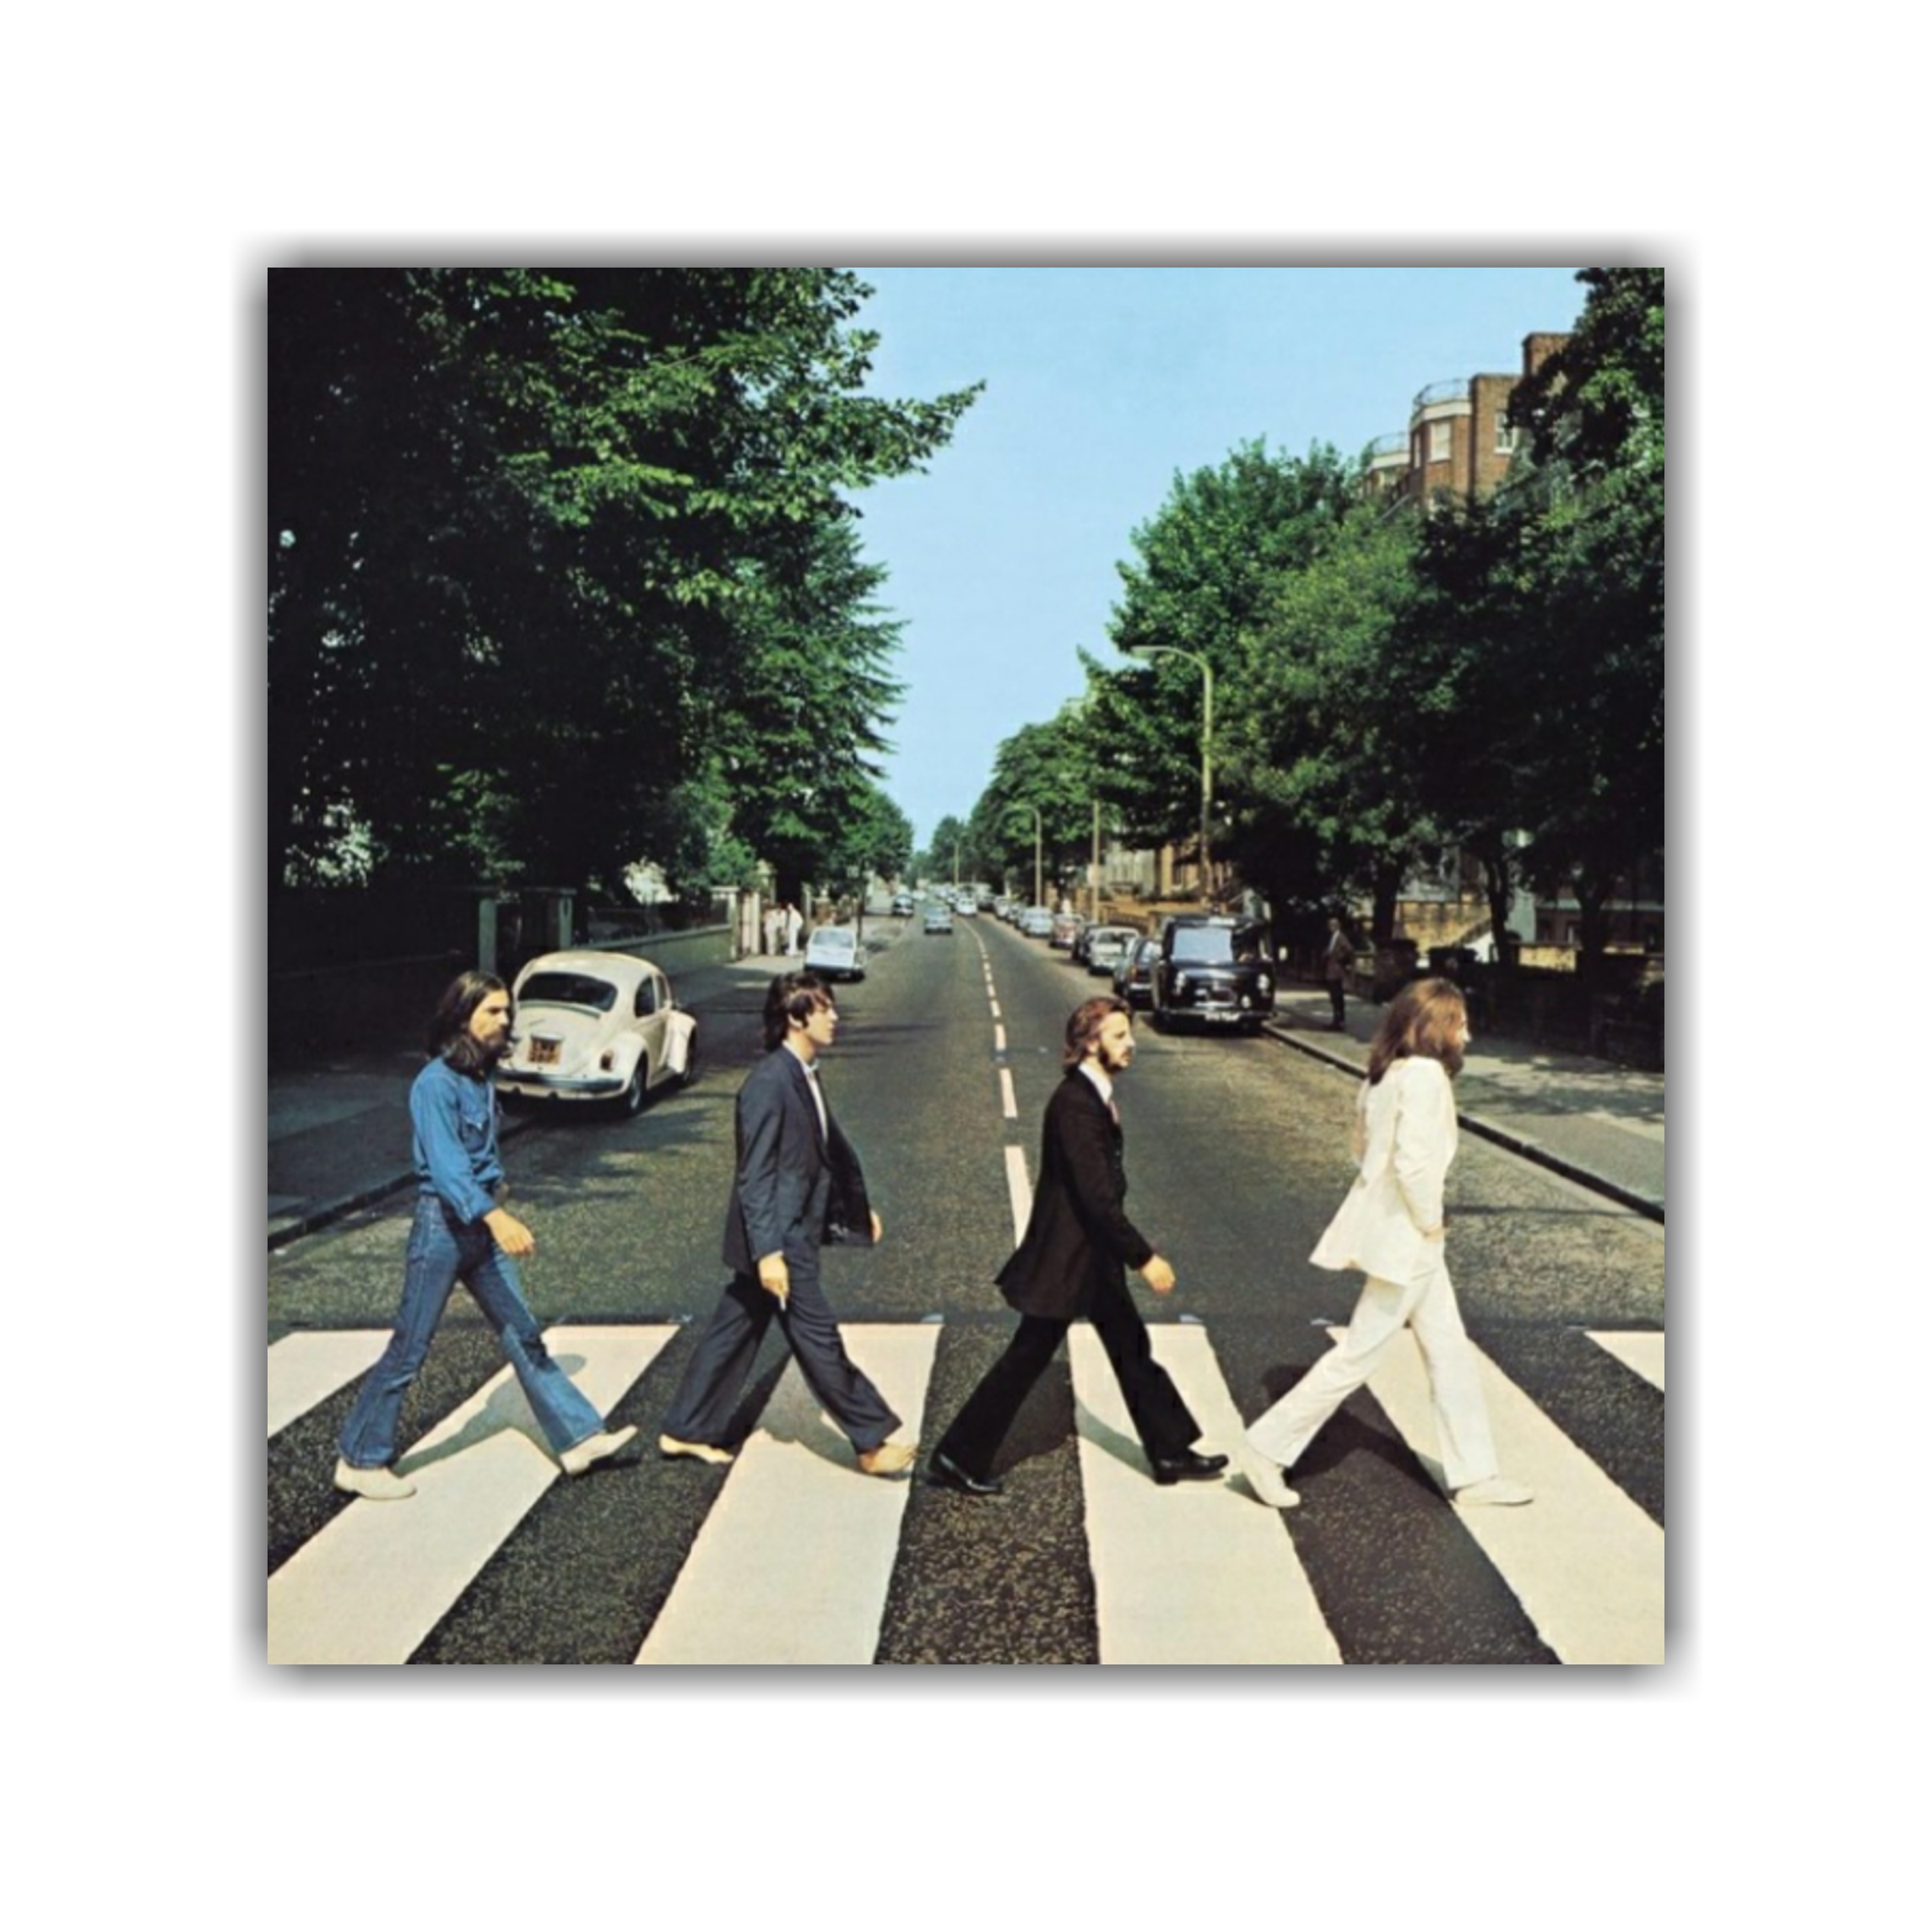 This visual is about abbeyroad thebeatles album albumcover freetoedit abbey ...